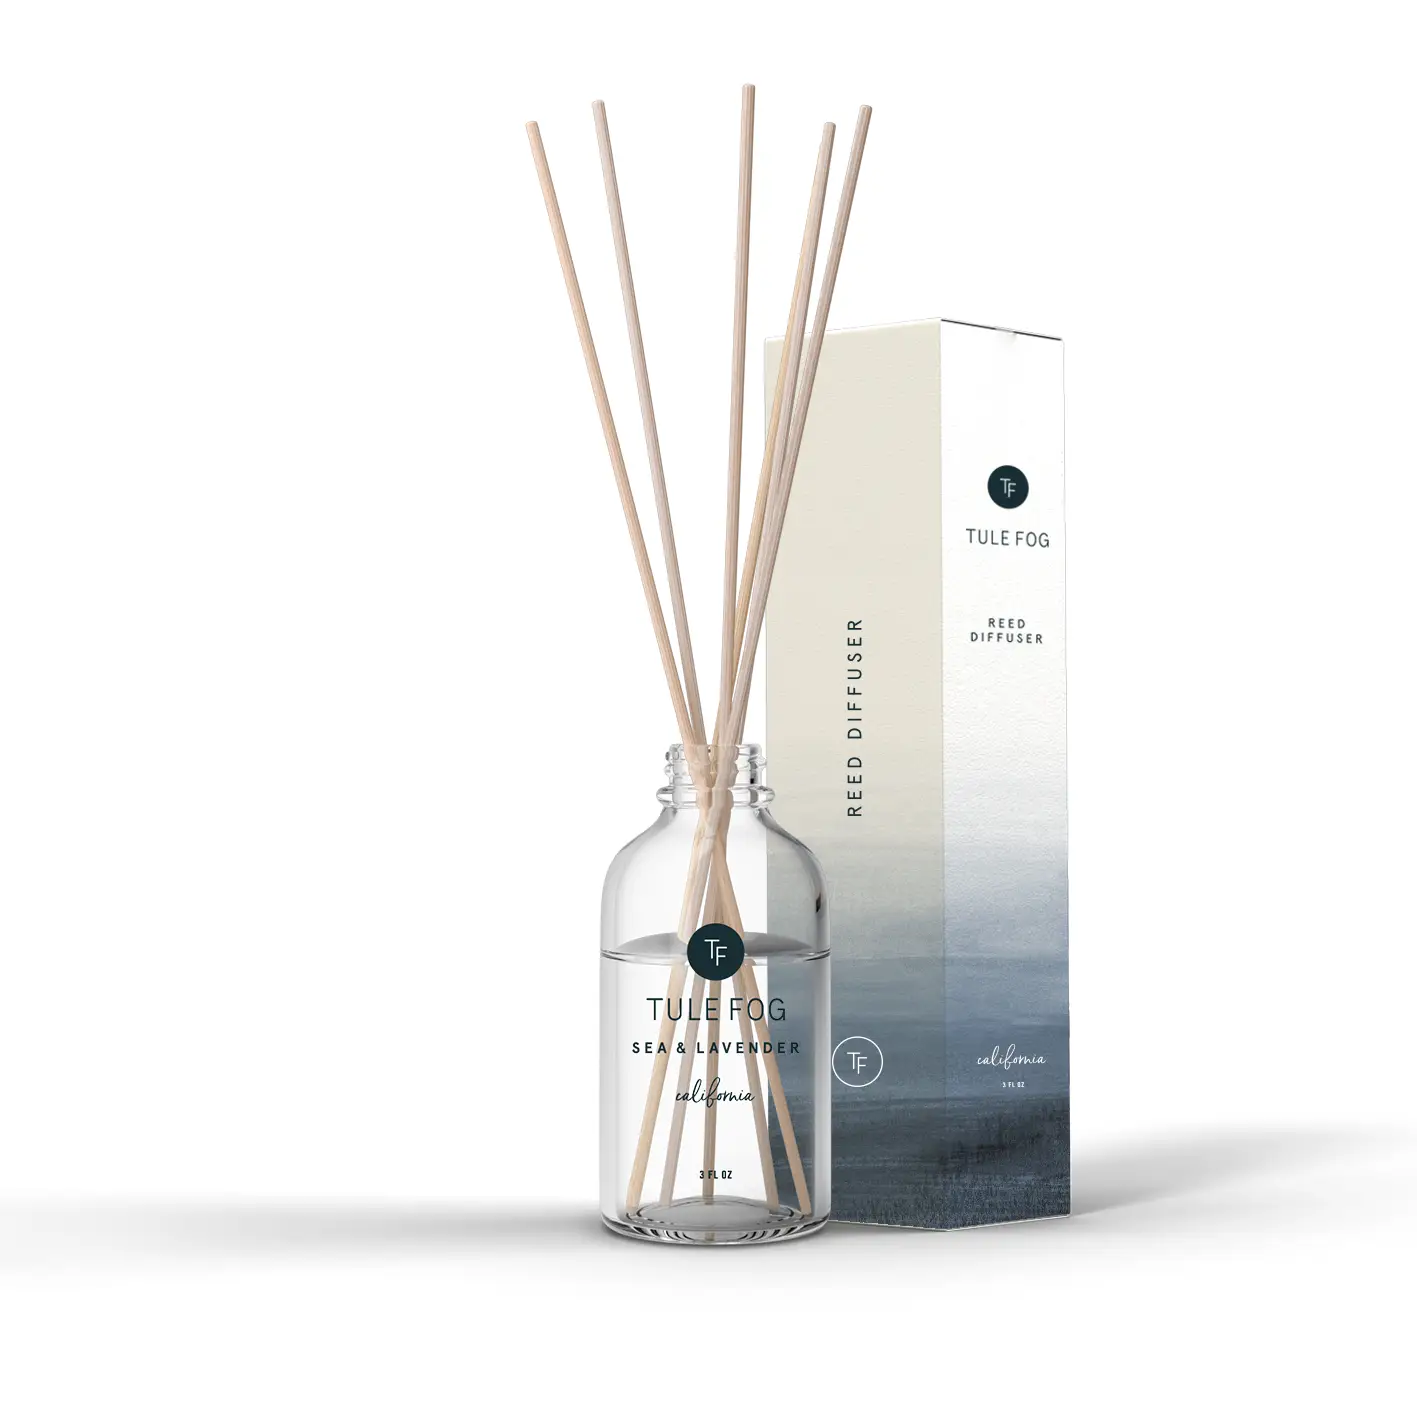 About this product Our best selling fragrance, Sea + Lavender is salty air mixed with the aroma of wildflowers native to the California coast. This reed diffuser is the best parts of the Bay Area and perfect for anywhere you want to invoke feelings of calm, serenity and comfort. Top notes: plum, ozone | Core notes: lavender, floral | Base notes: vanilla, amber